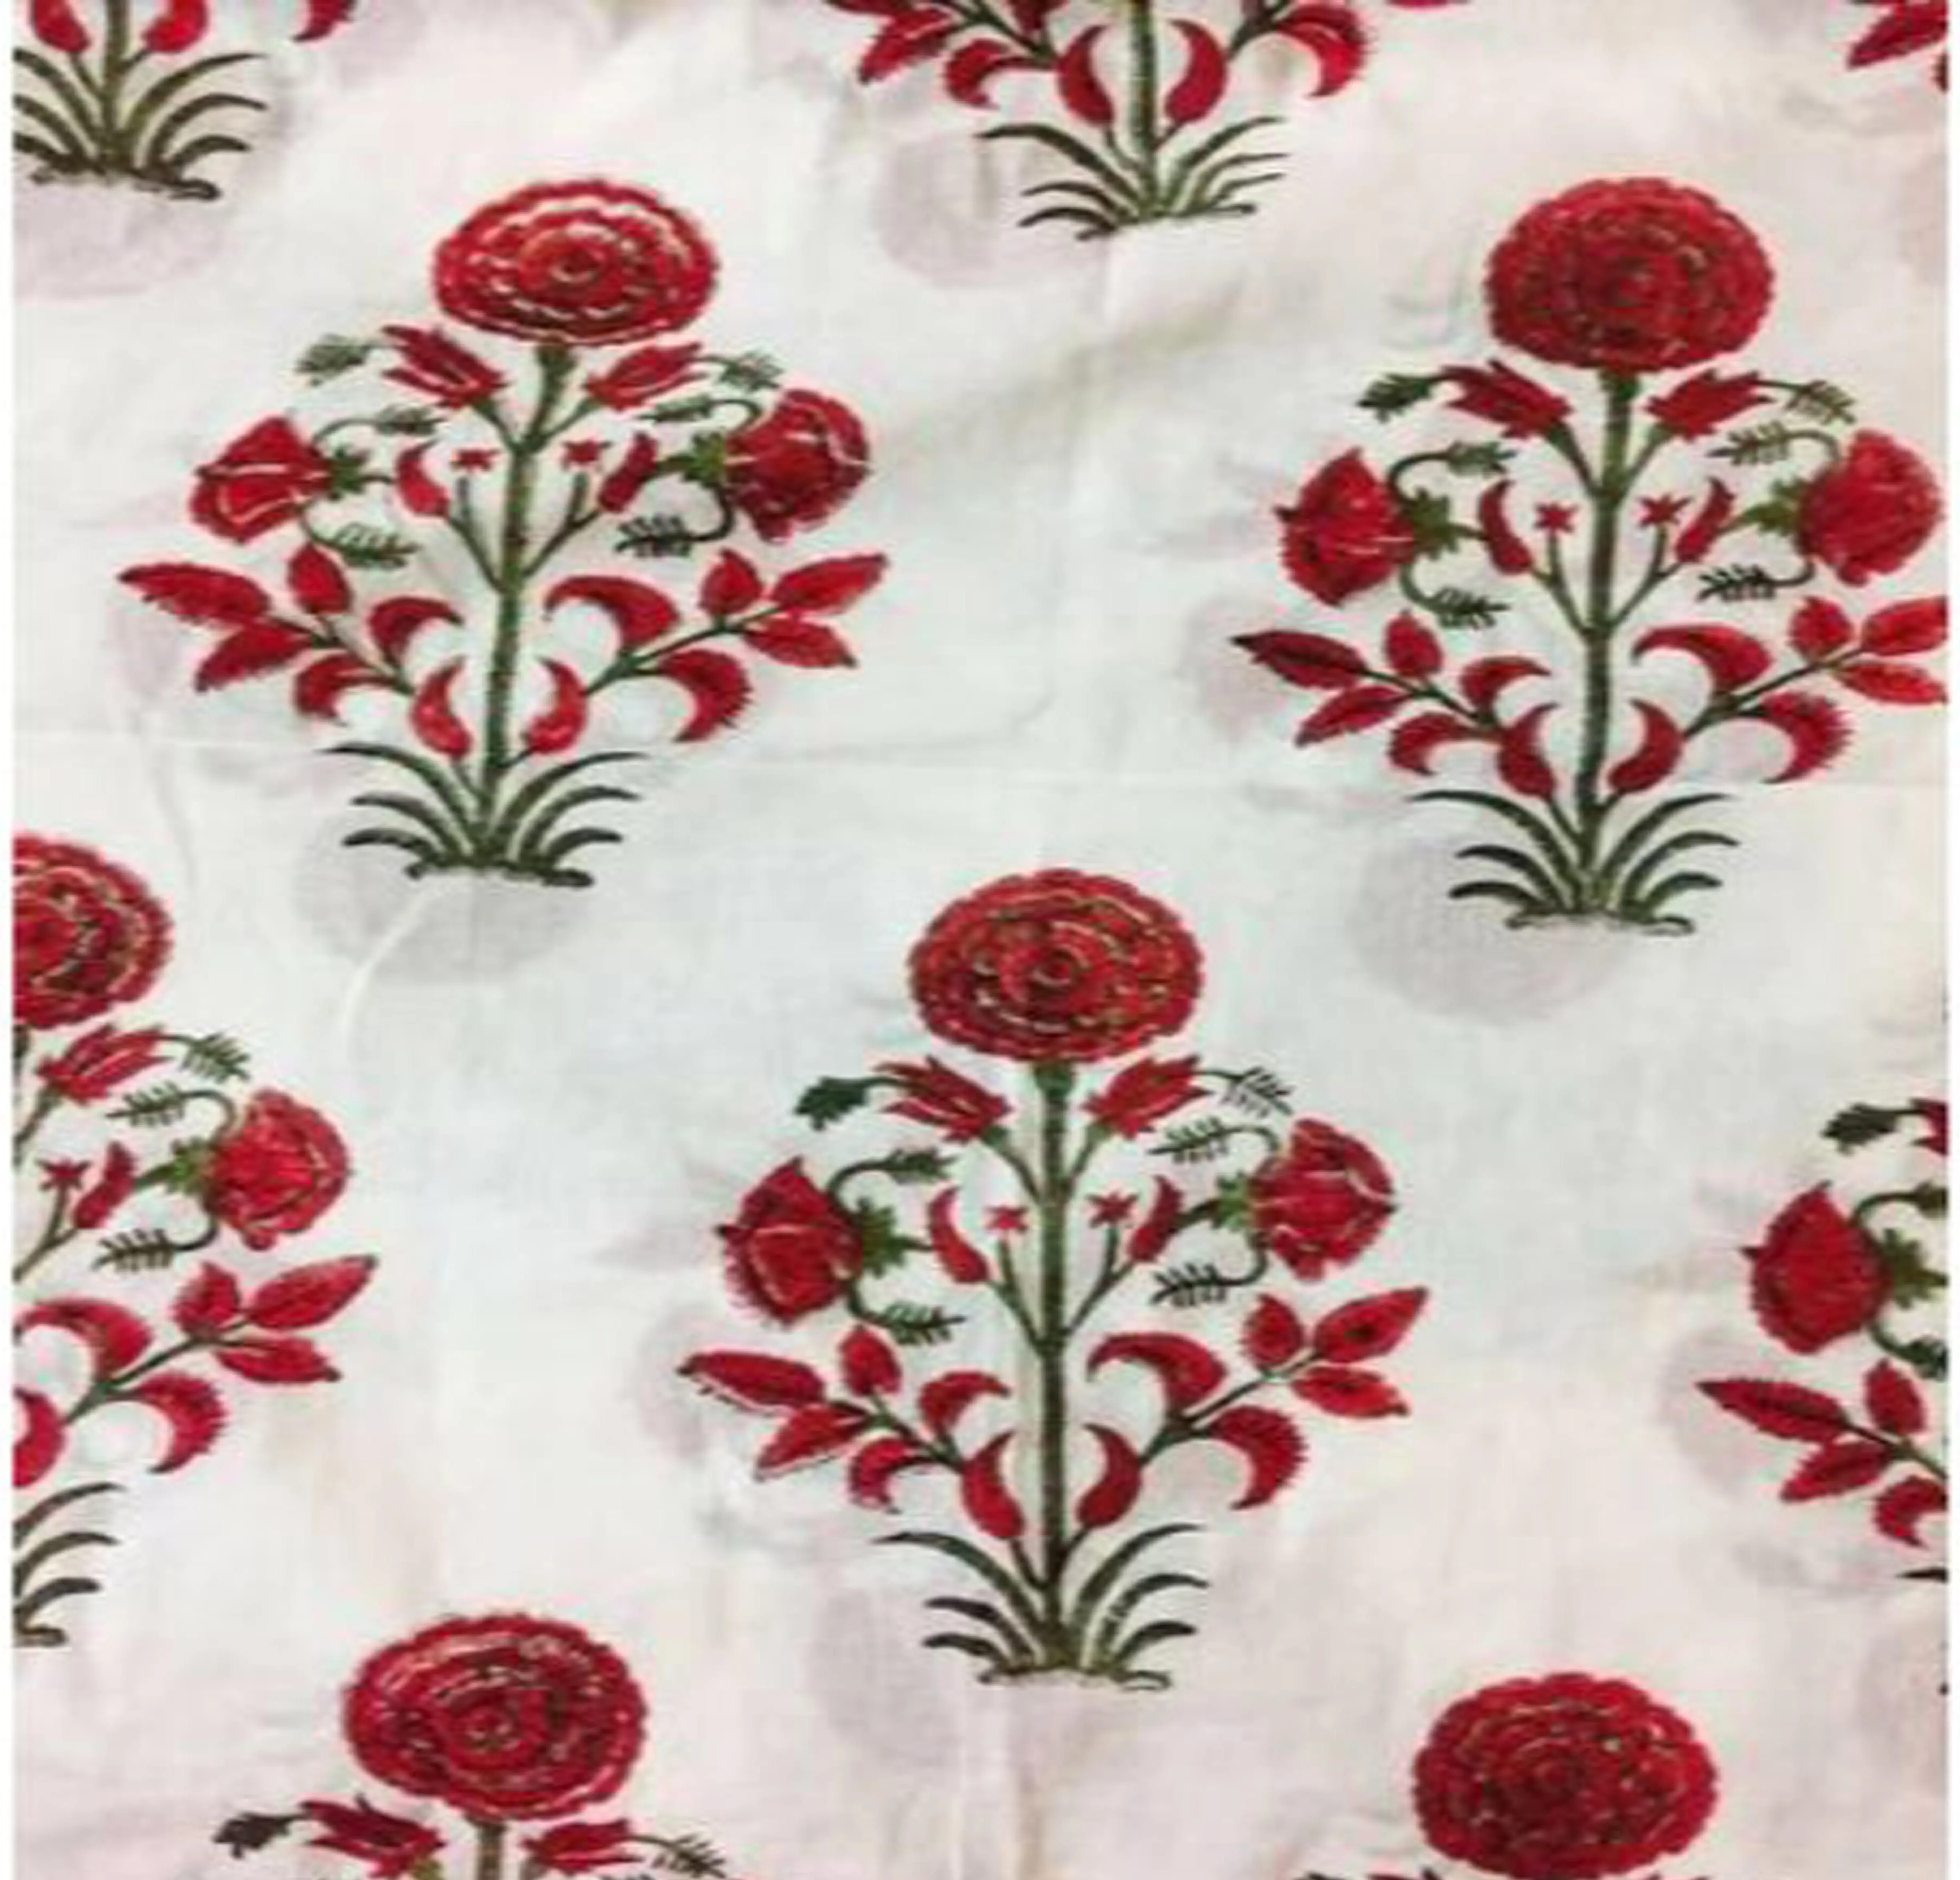 Hand Block Print 100% Cotton Fabric New Design Plain Or Twill Weave Fabric Dying & Printing dress,shirt,top,skirt,suit